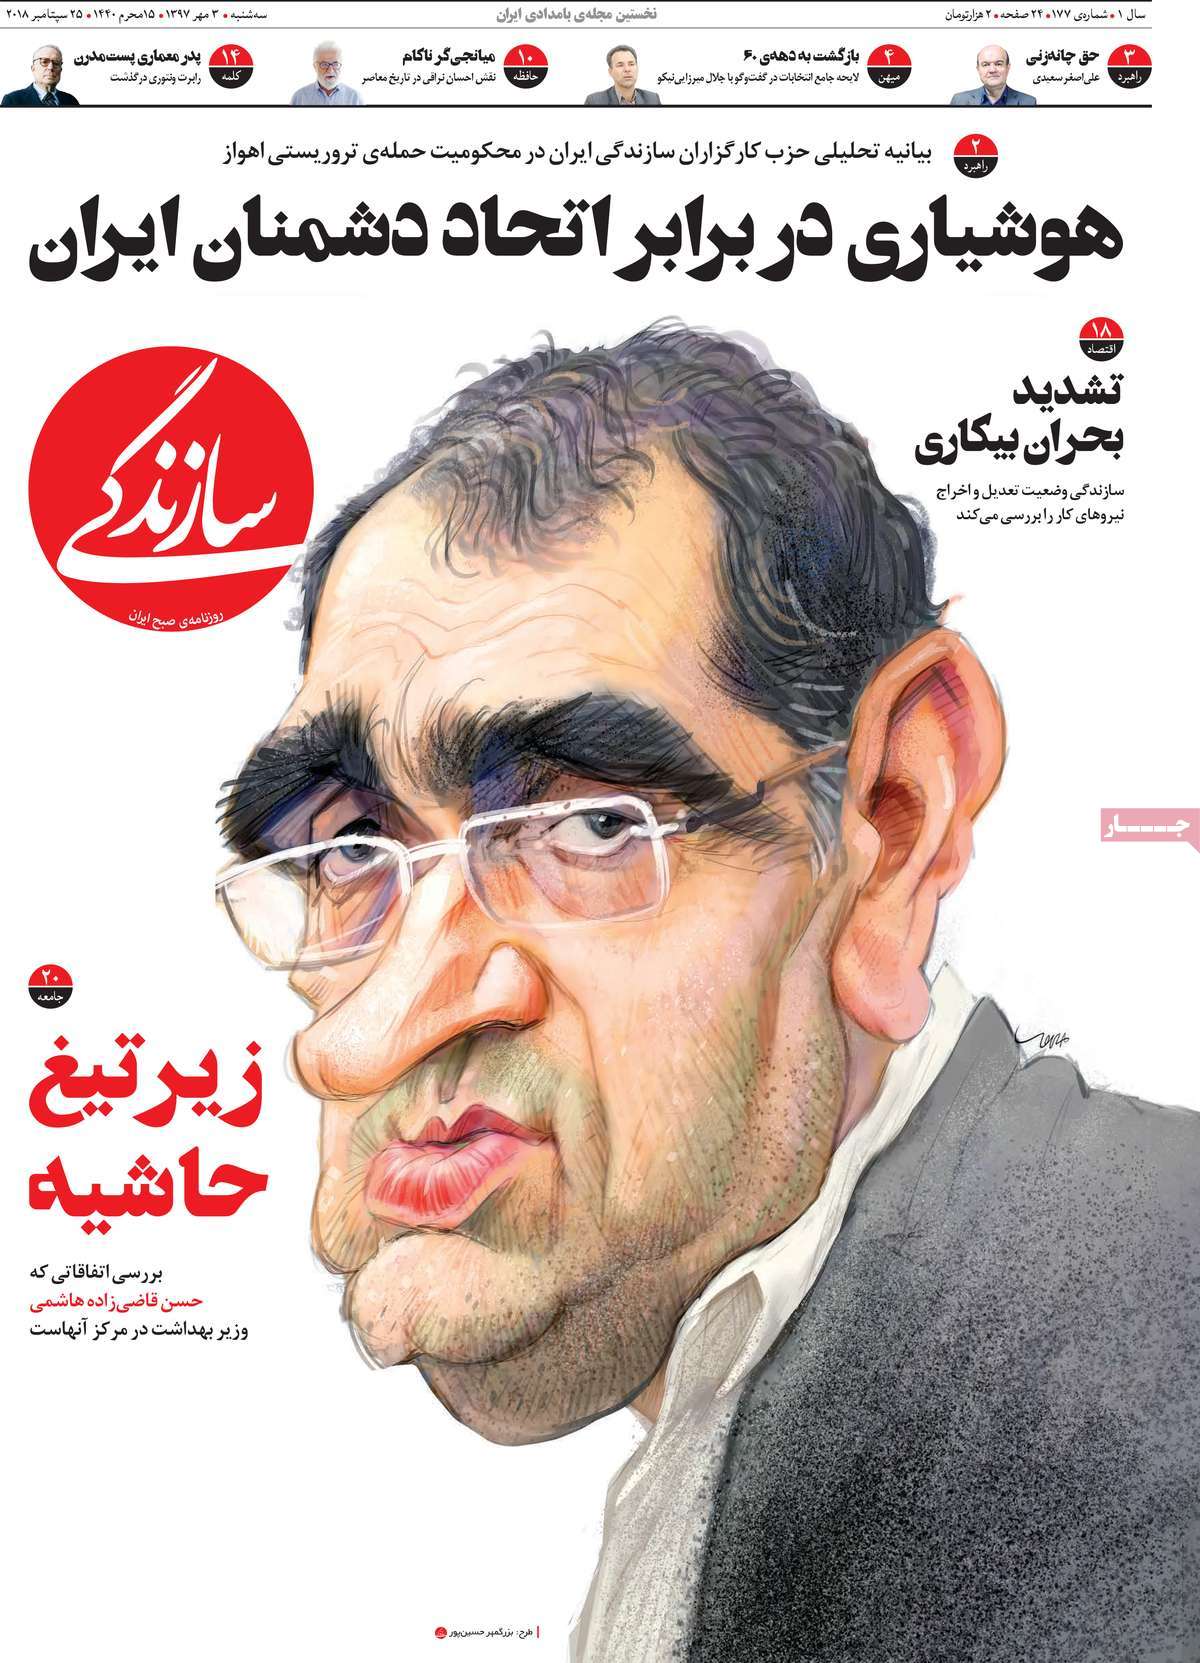 A Look at Iranian Newspaper Front Pages on September 25